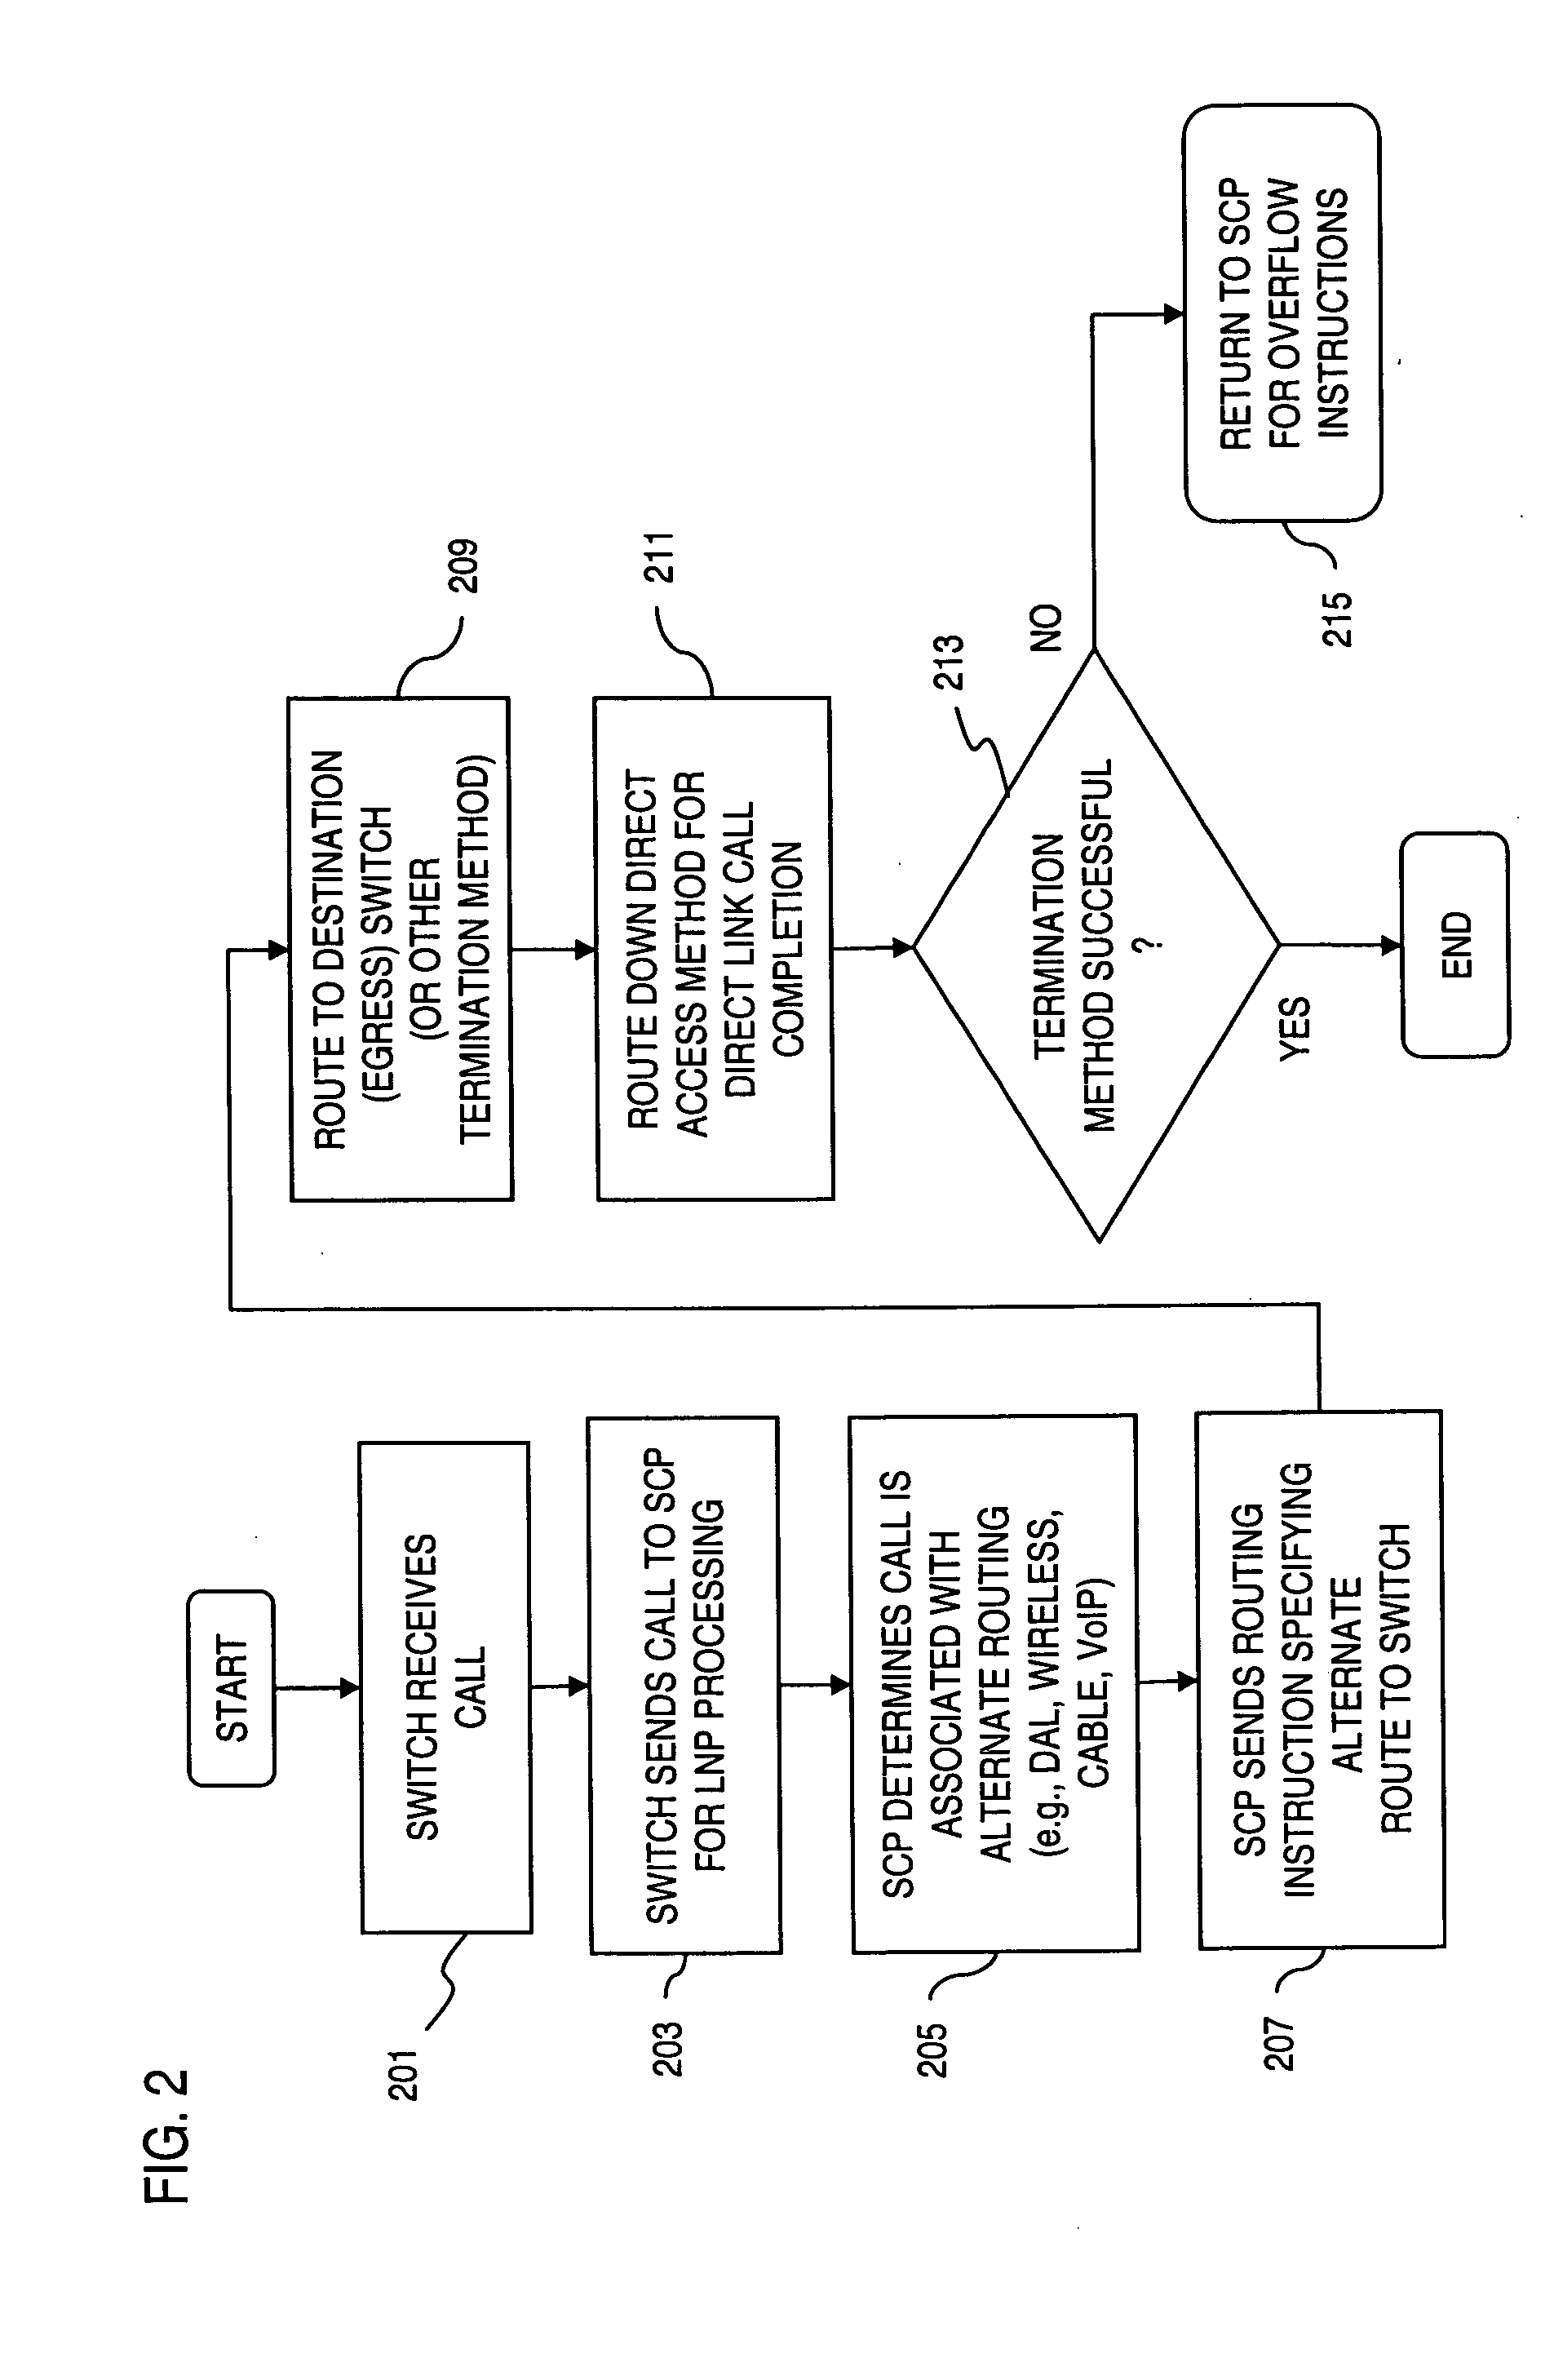 Method and system for providing direct routing of local number portability (LNP) calls to alternate terminations